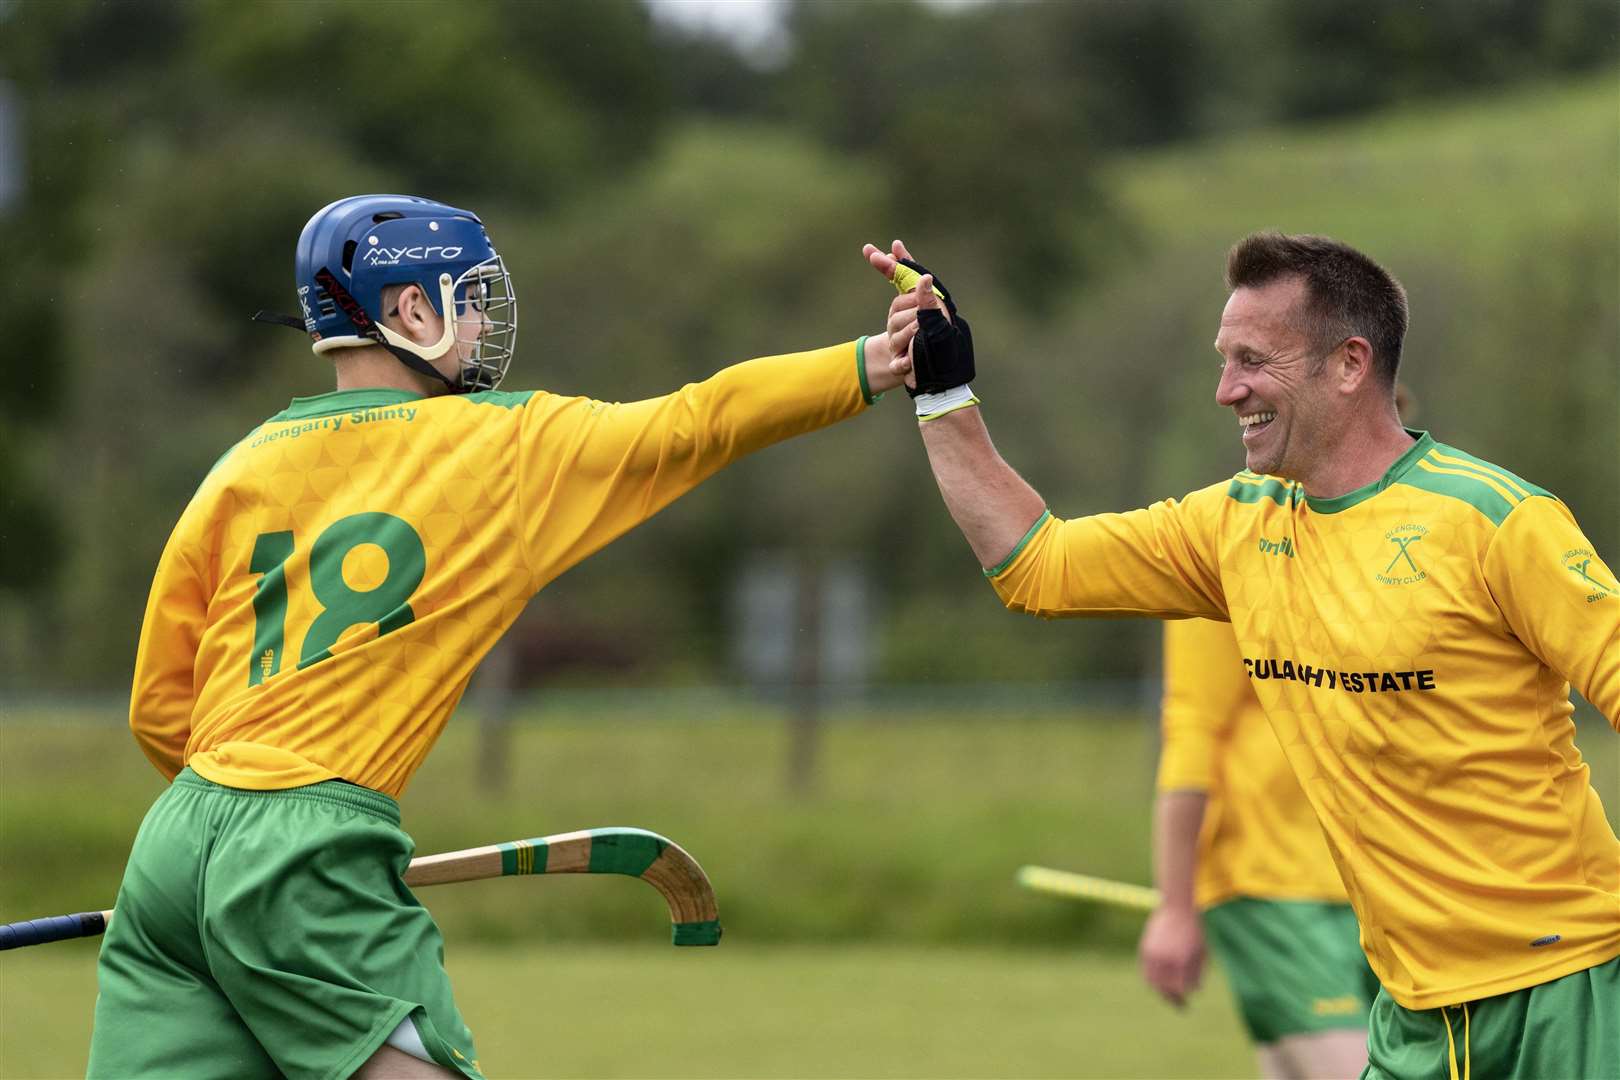 Glengarry No. 18 Jack West scores his first goal for the senior team and is congratulated by Scott Bremner. Boleskine v Glengarry in the Single Team Club Competition semi final.